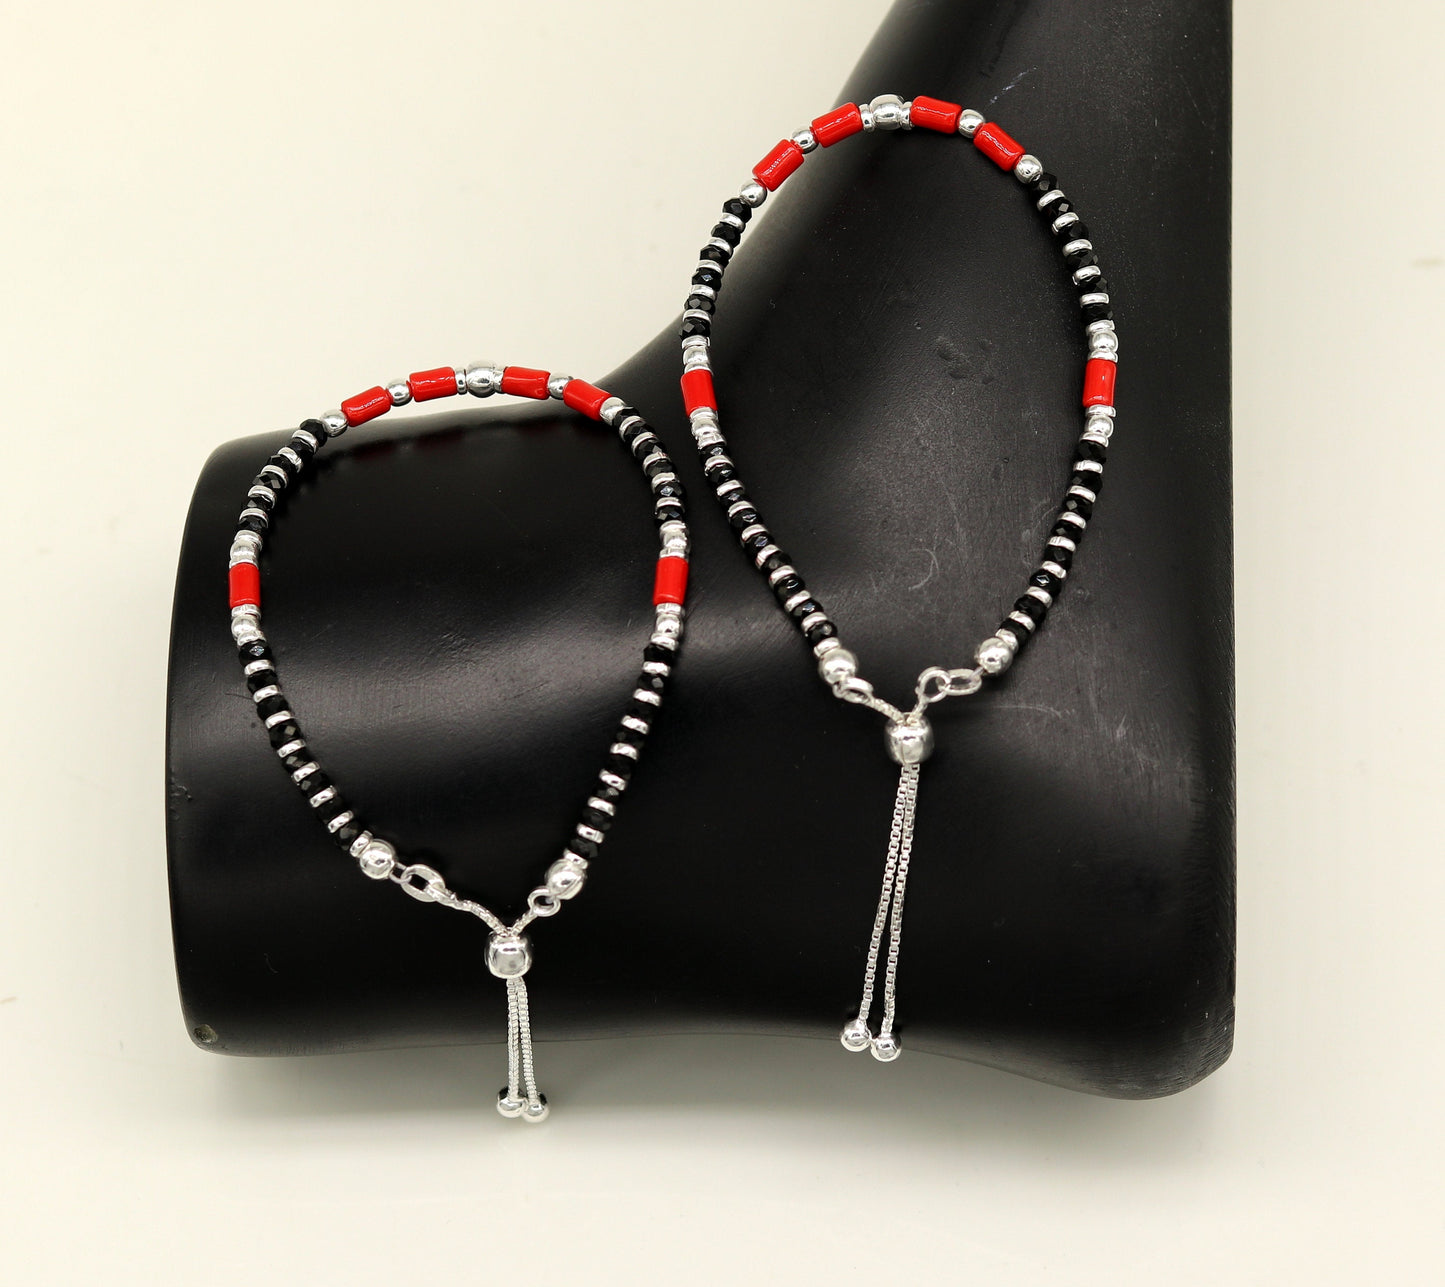 7 inches long handmade 925 sterling silver fabulous silver beads, black and red beads stone charm adjustable customized bracelet sbr167 - TRIBAL ORNAMENTS